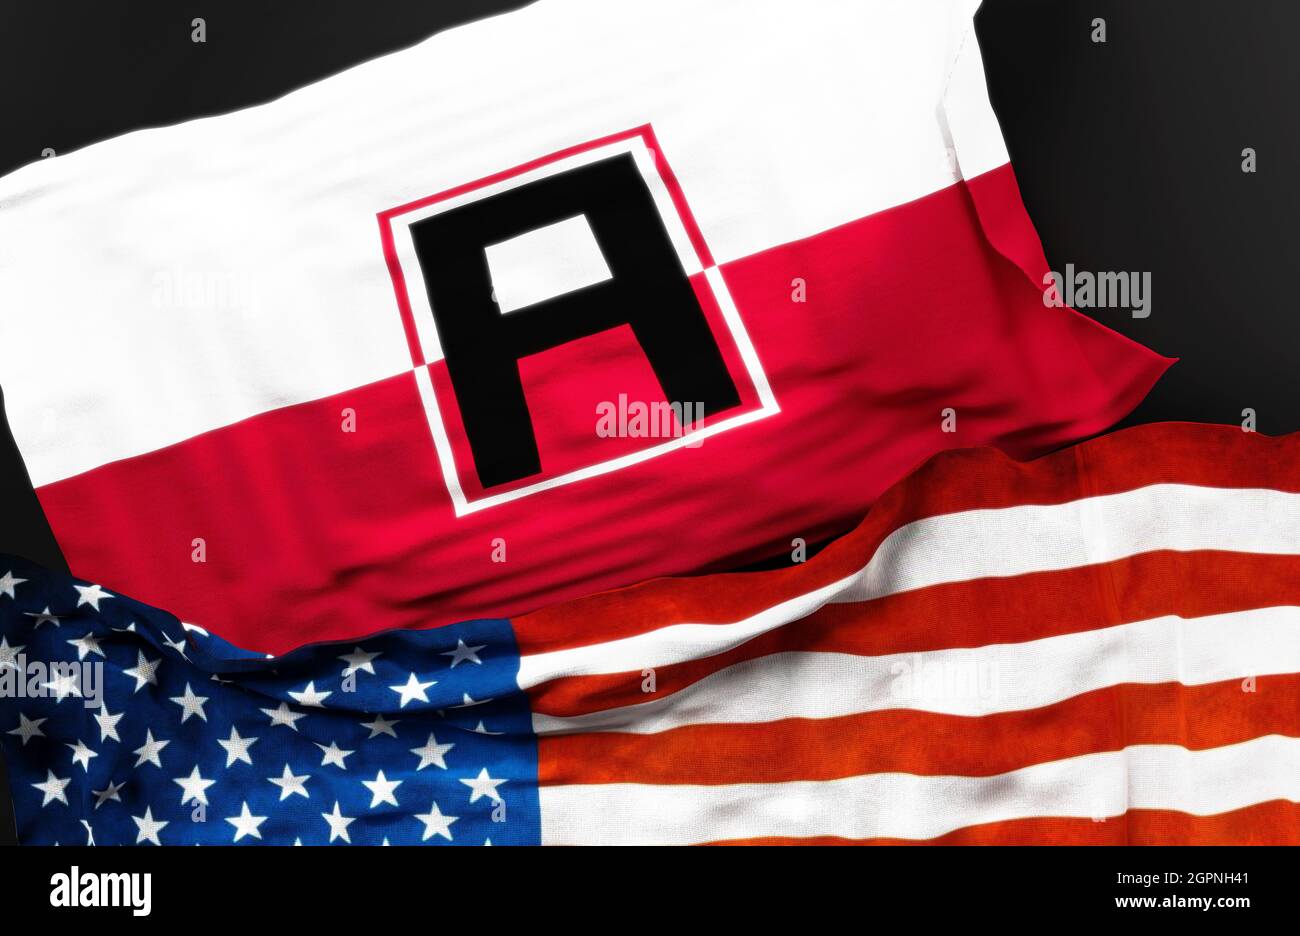 Flag of the First United States Army along with a flag of the United States of America as a symbol of unity between them, 3d illustration Stock Photo